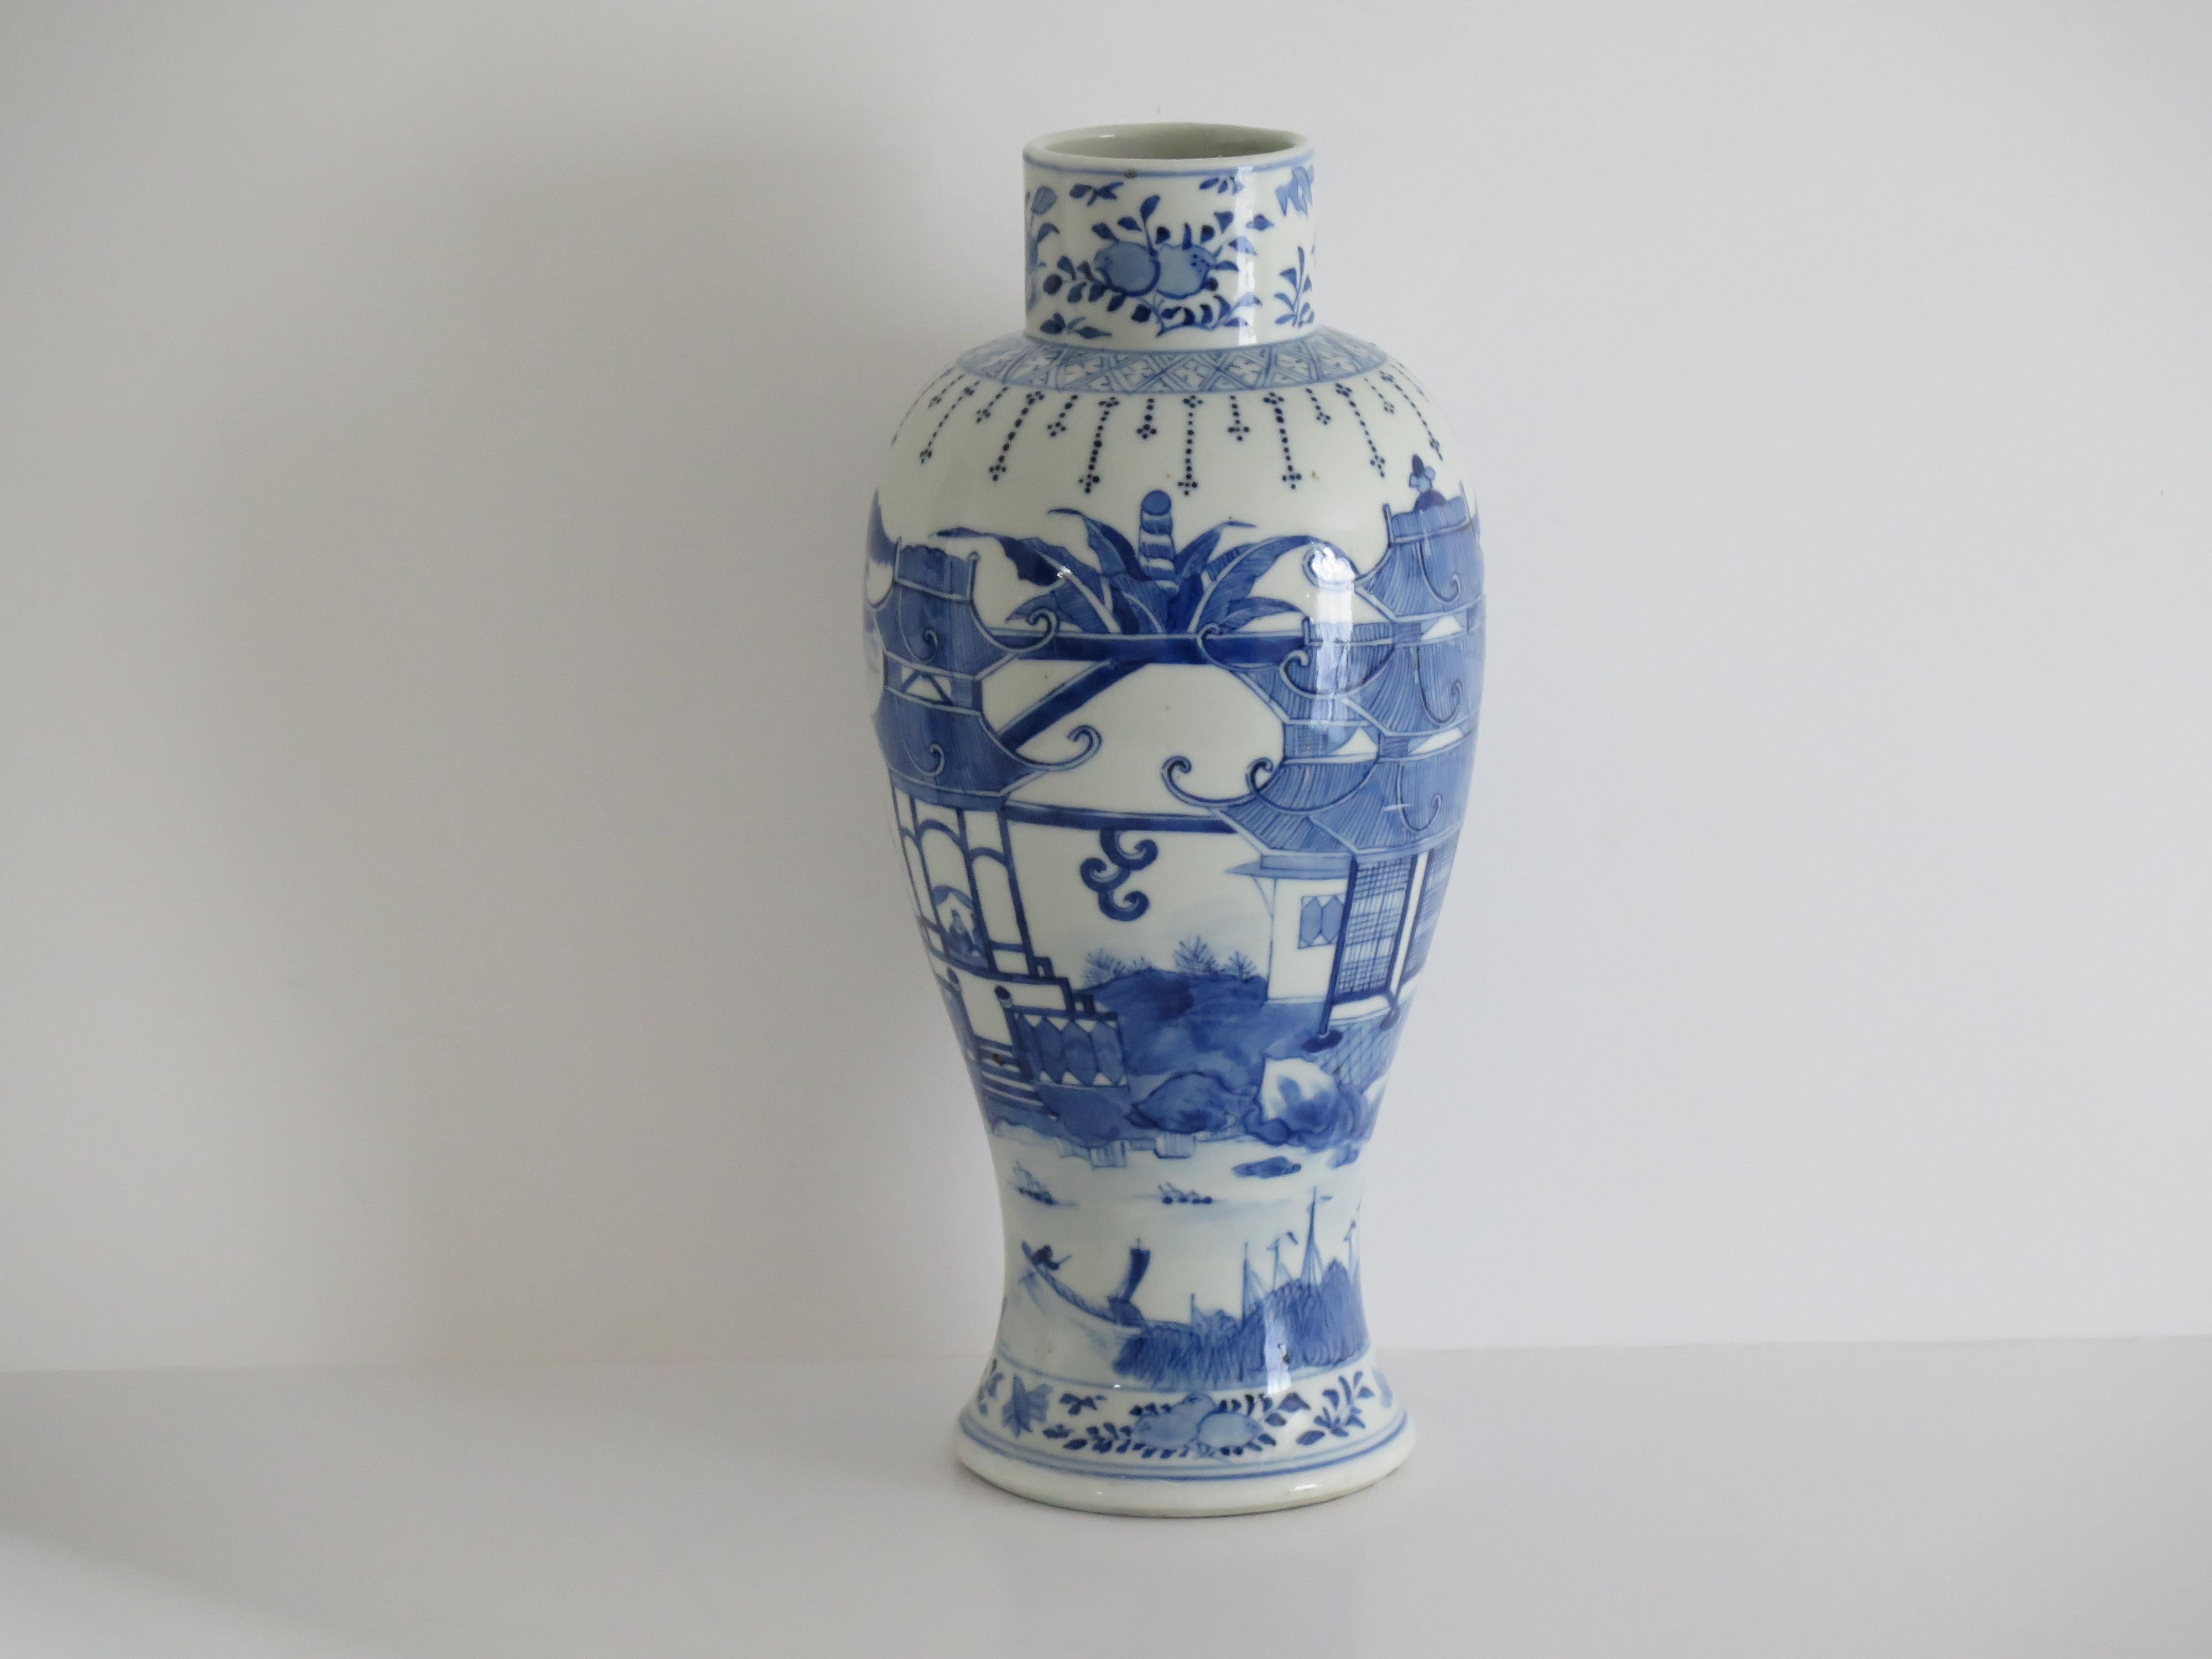 Chinese Export Porcelain Vase Blue & White Hand Painted 31cm, 19thC Qing Tongzhi In Good Condition For Sale In Lincoln, Lincolnshire